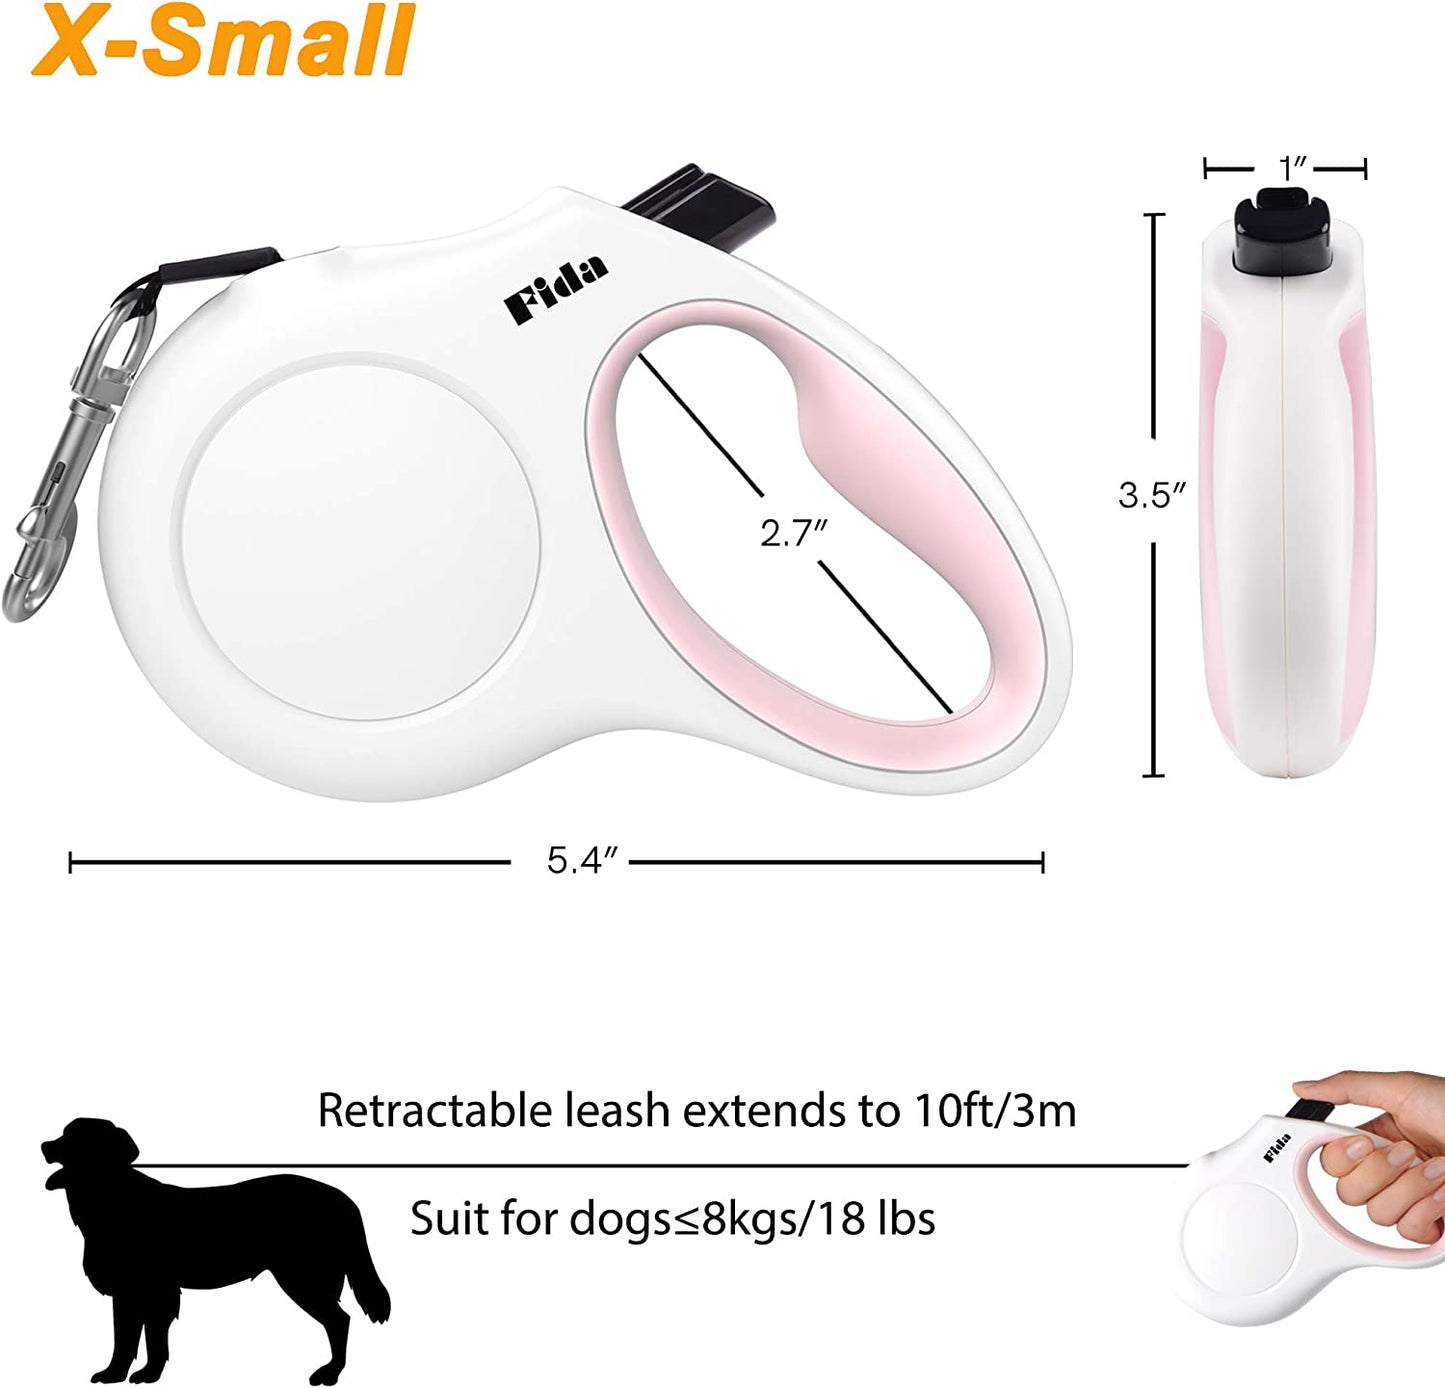 Fida Retractable Dog Leash with Dispenser and Poop Bags, 10 Ft Pet Walking Leash for X-Small Dog or Cat up to 18 Lbs, Anti-Slip Handle, Tangle Free, Reflective Nylon Tape (XS, White)